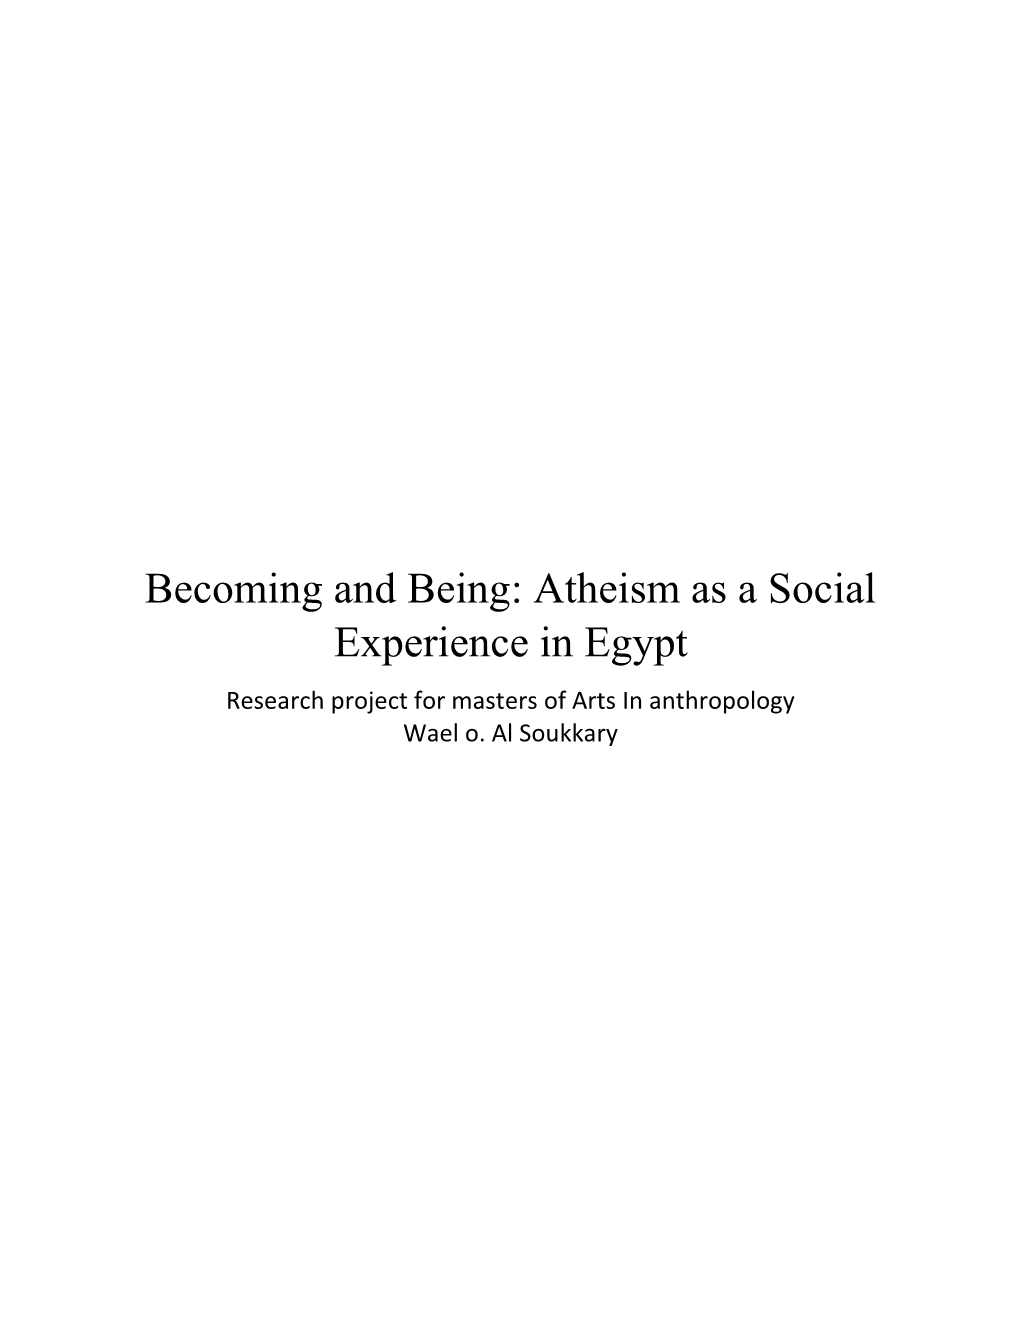 Atheism As a Social Experience in Egypt Research Project for Masters of Arts in Anthropology Wael O